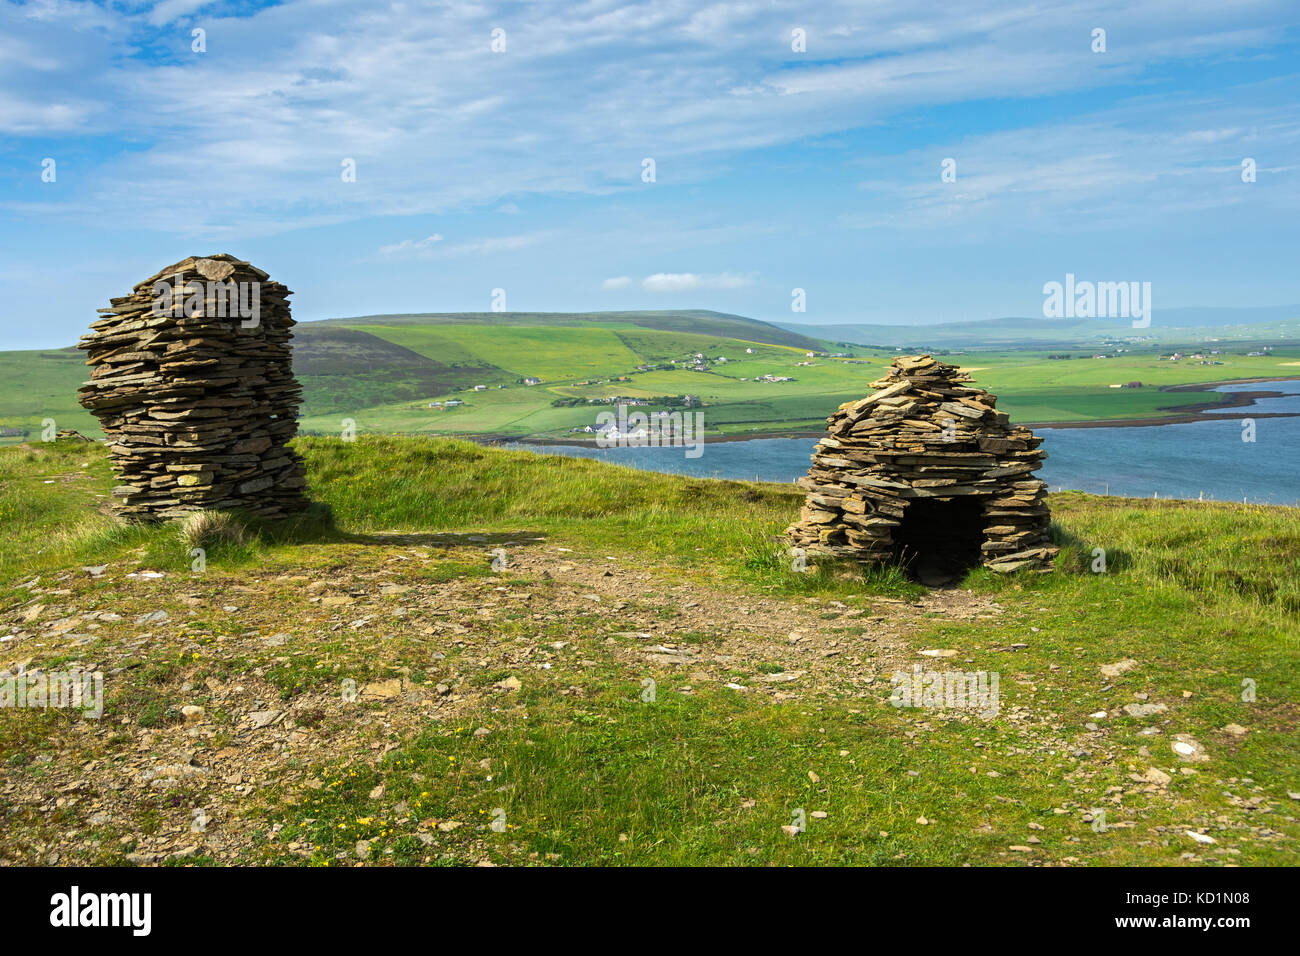 The Bay of Firth from Cuween Hill, Orkney Mainland, Scotland, UK. Stock Photo